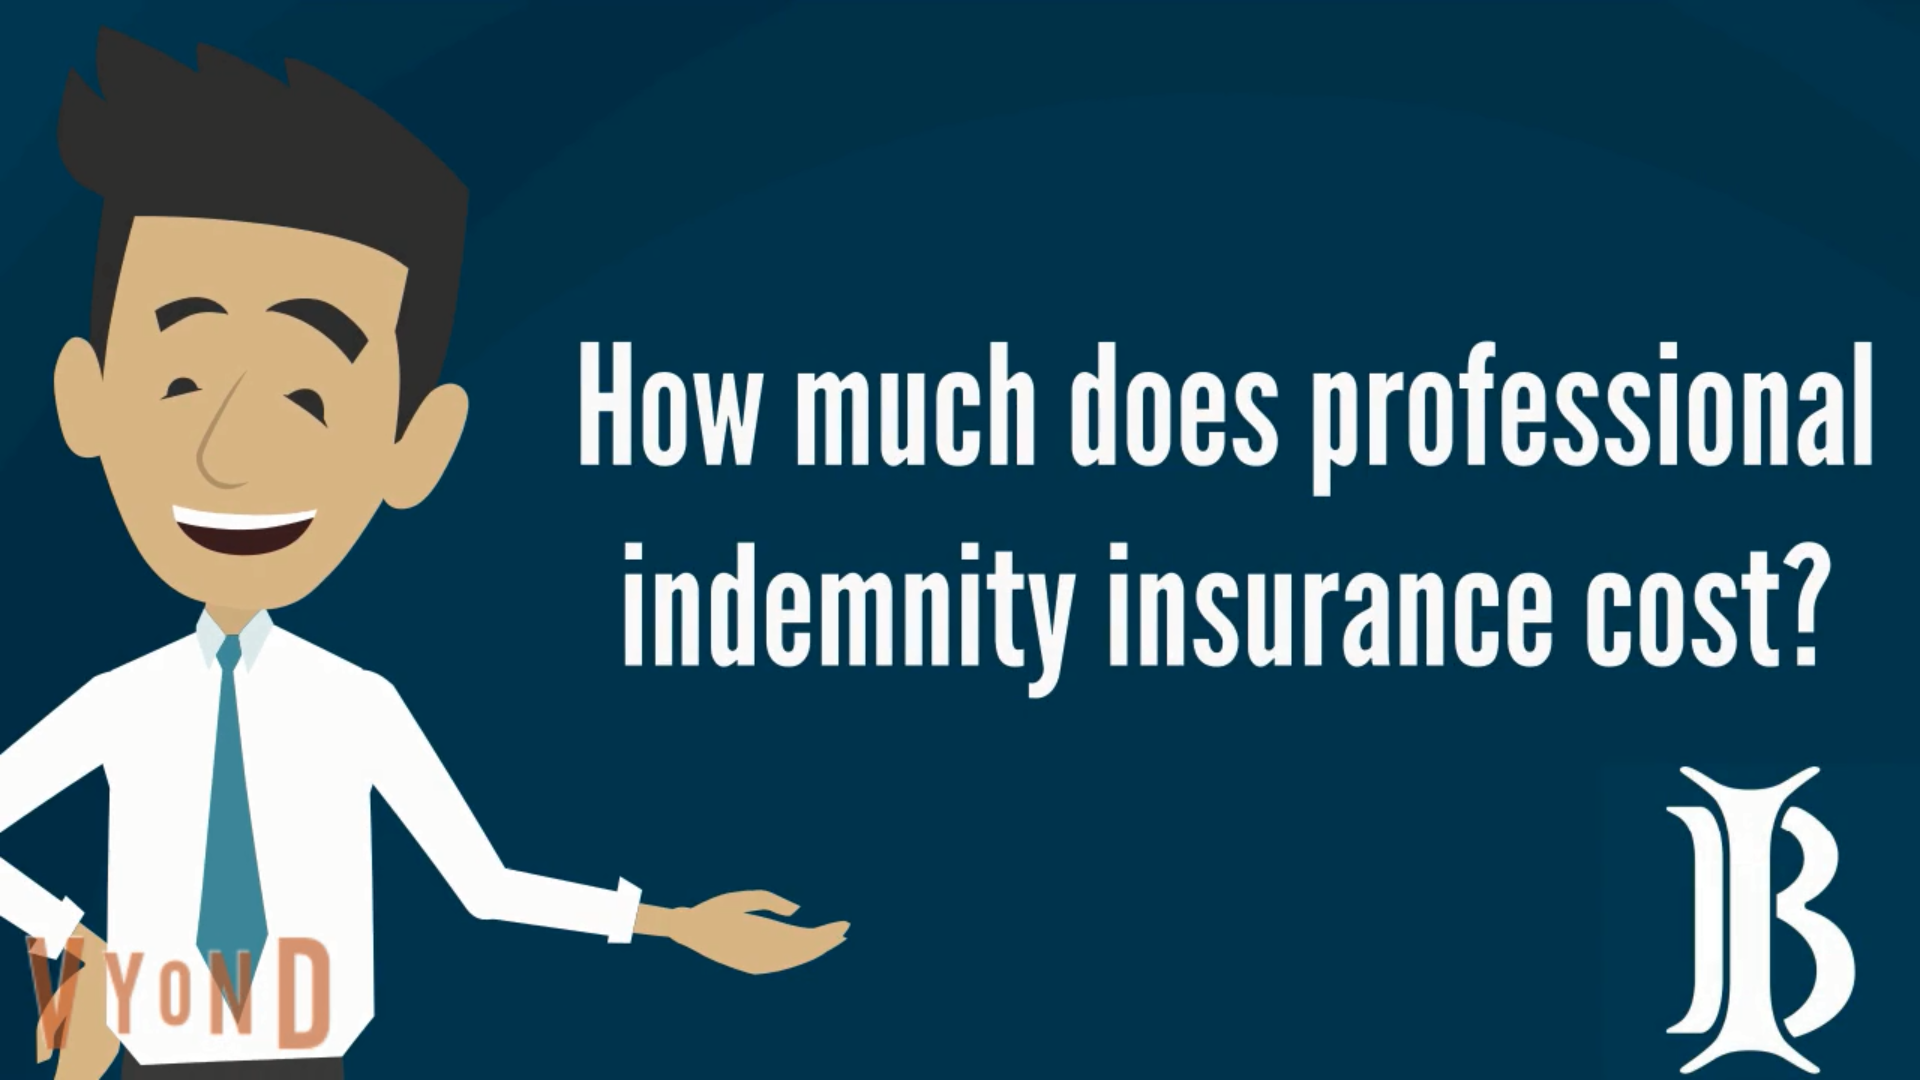 Professional Indemnity Insurance Cost